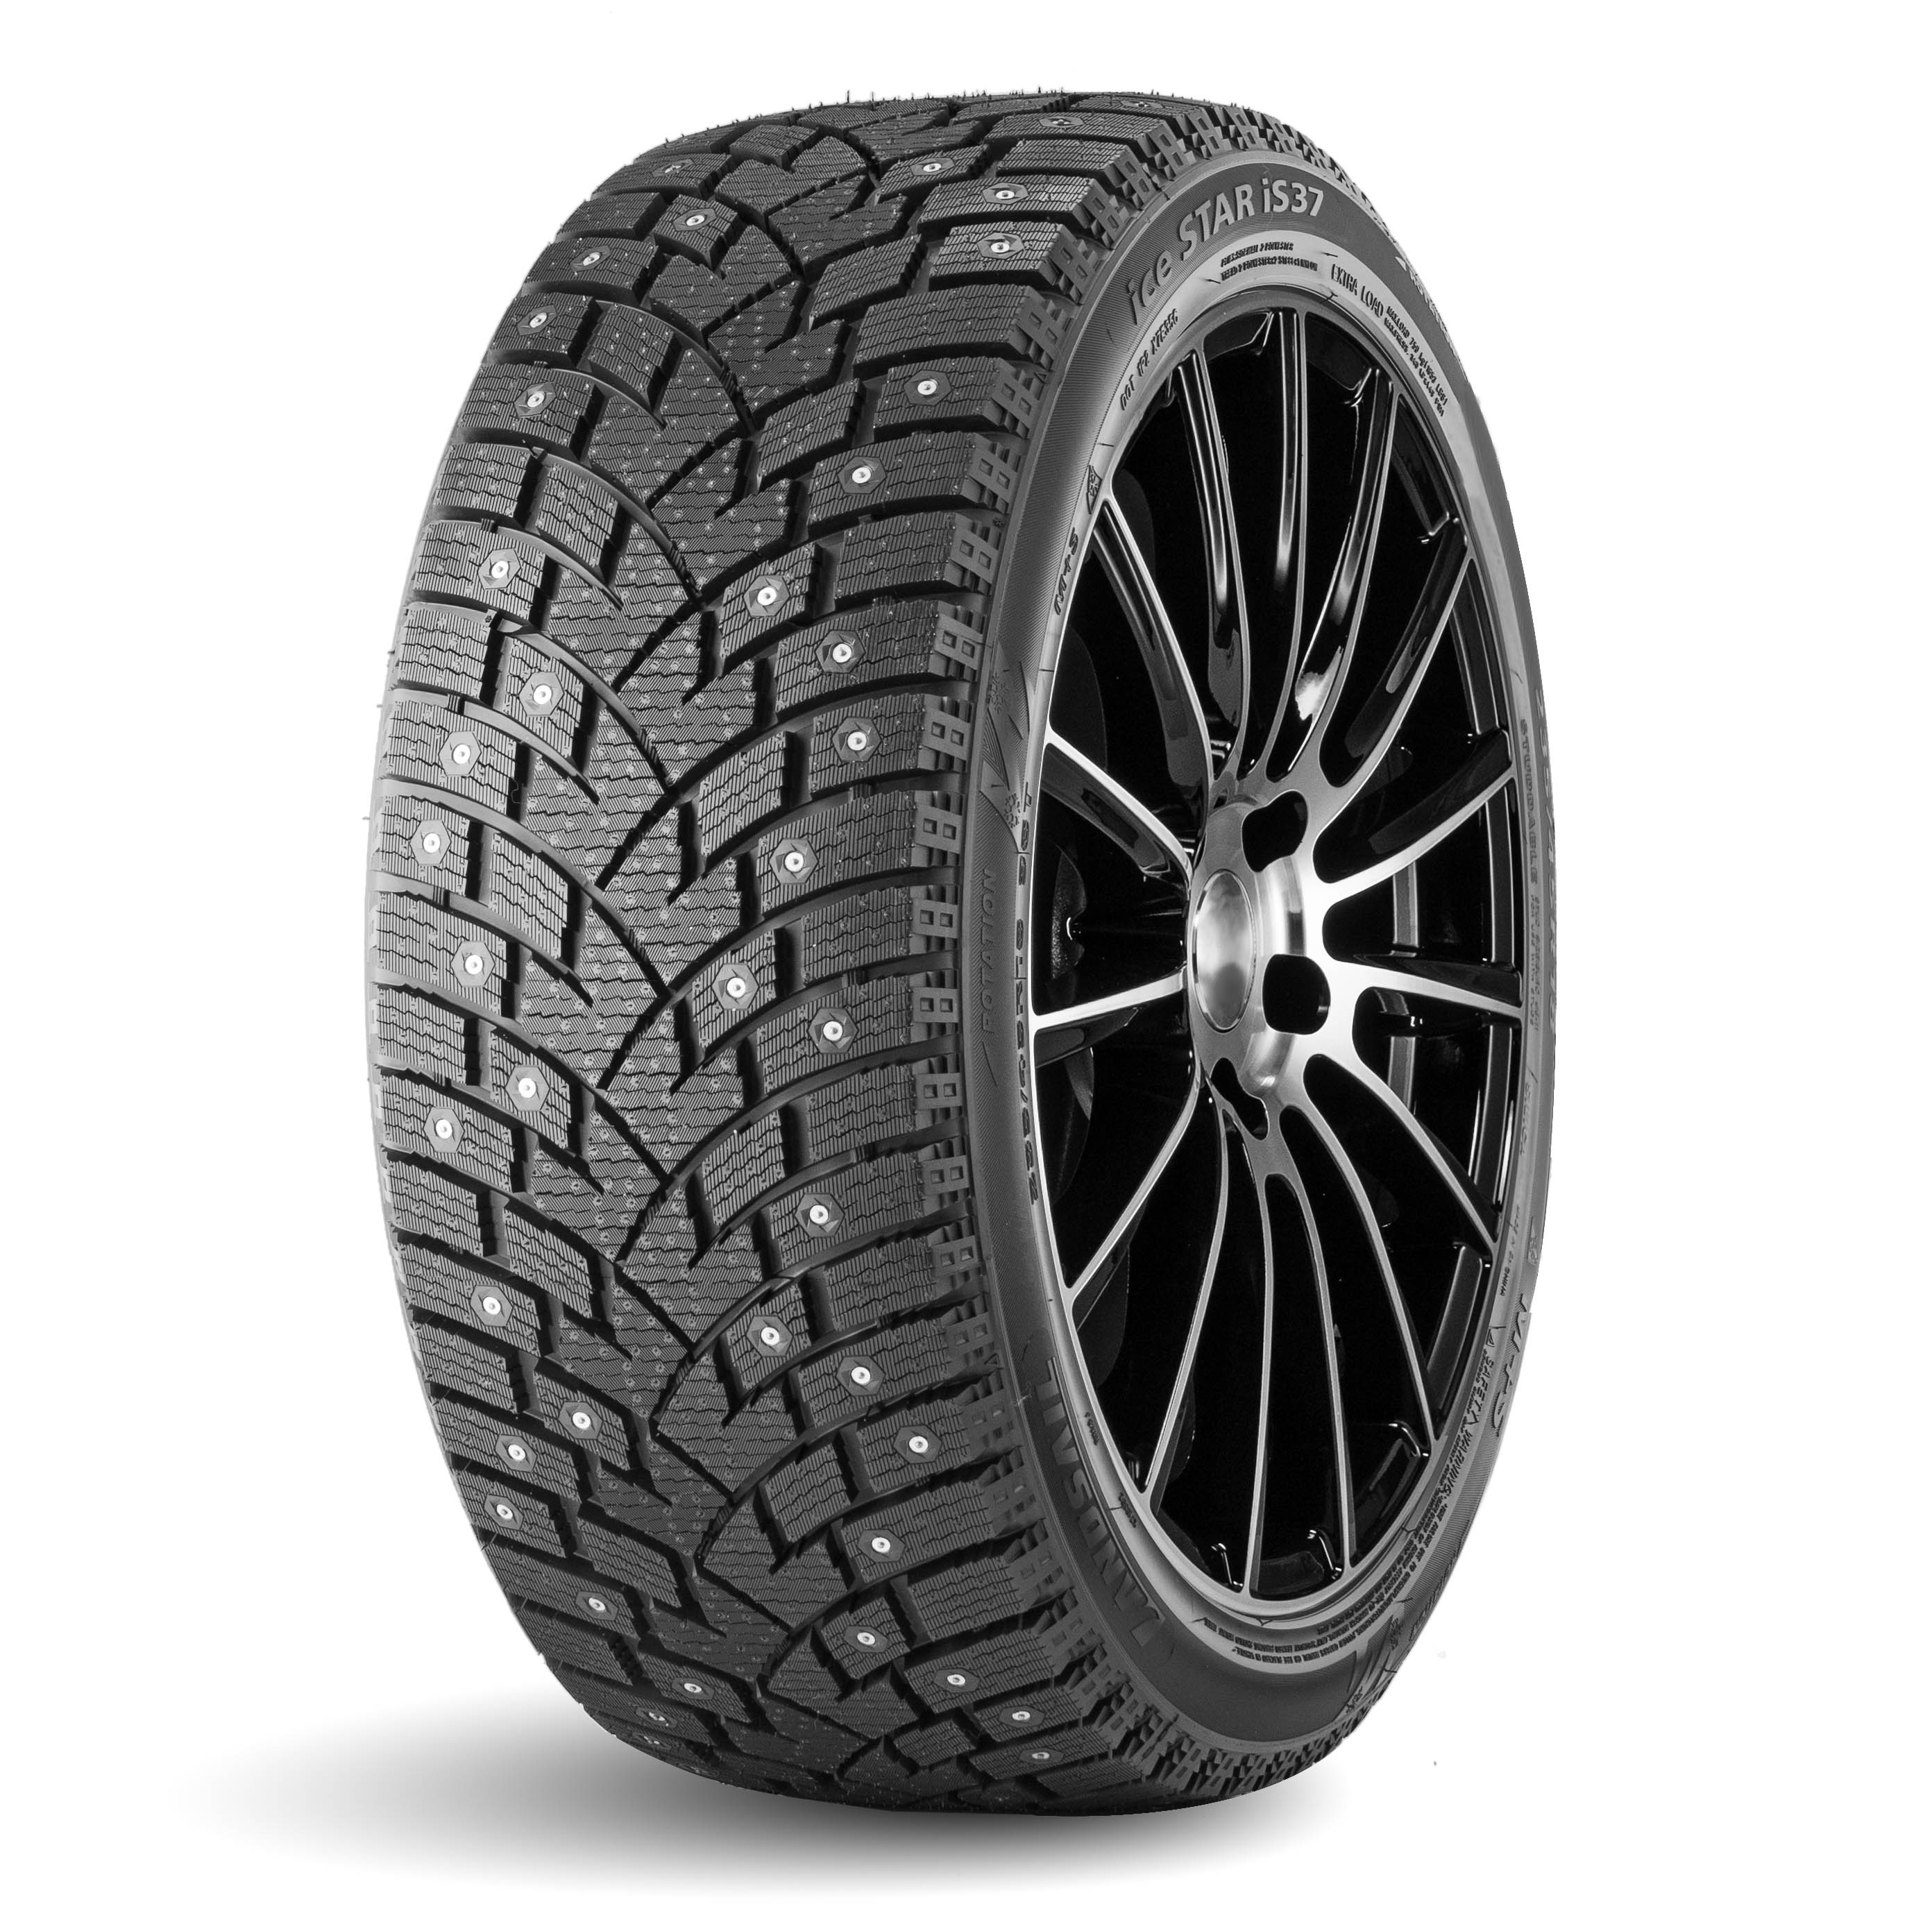 Ice Star iS37 205/65 R16 107/105R